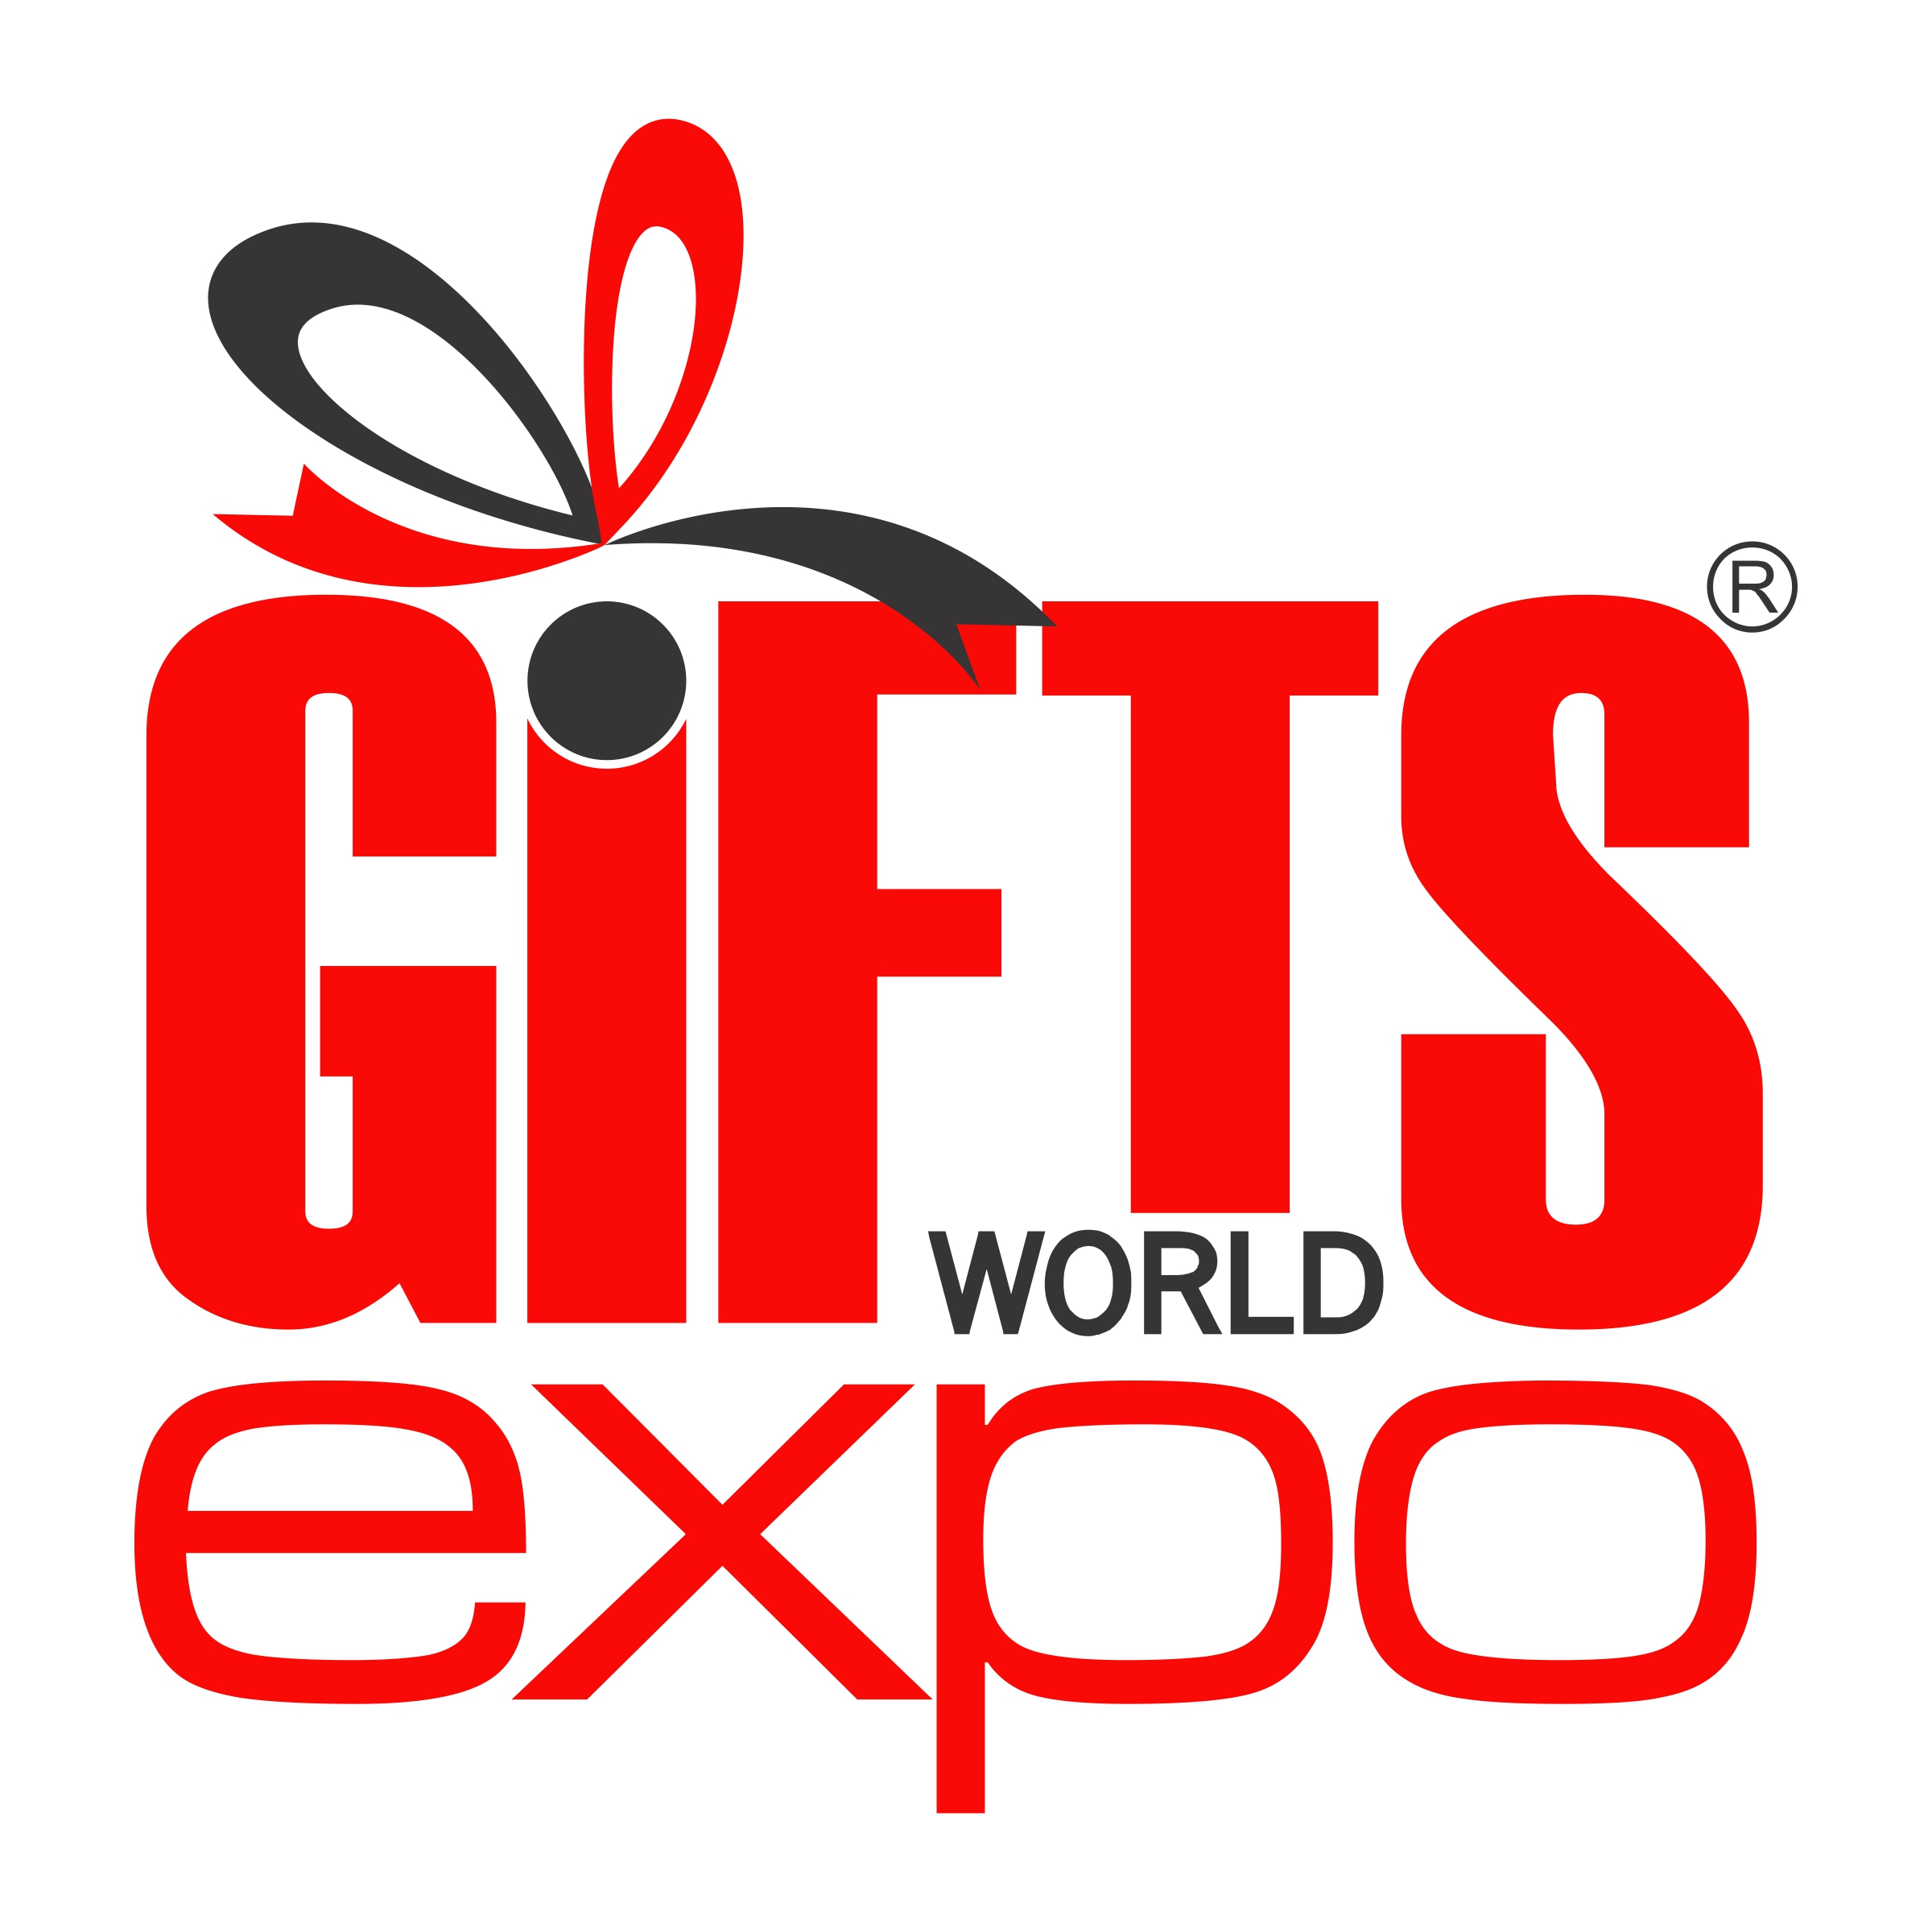 MEX Exhibitions Announces a Novel Opportunity for Gifting Industry, Launches Online Edition of Gifts World Expo